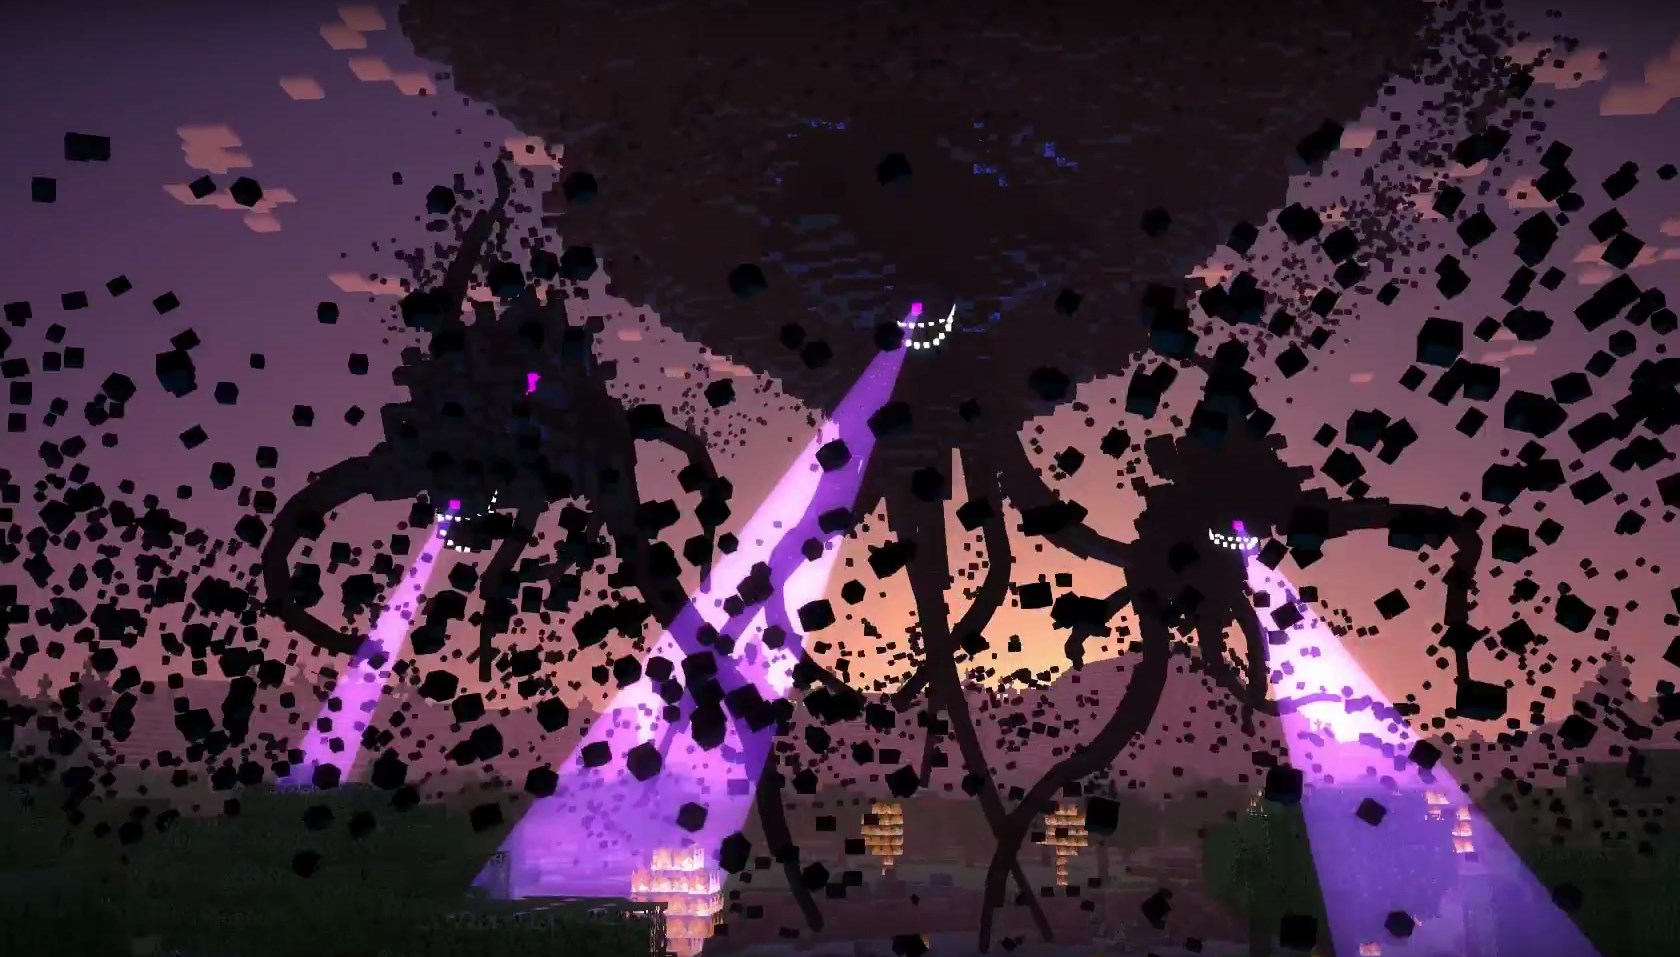 Wither Storm, Minecraft Mobs Wiki